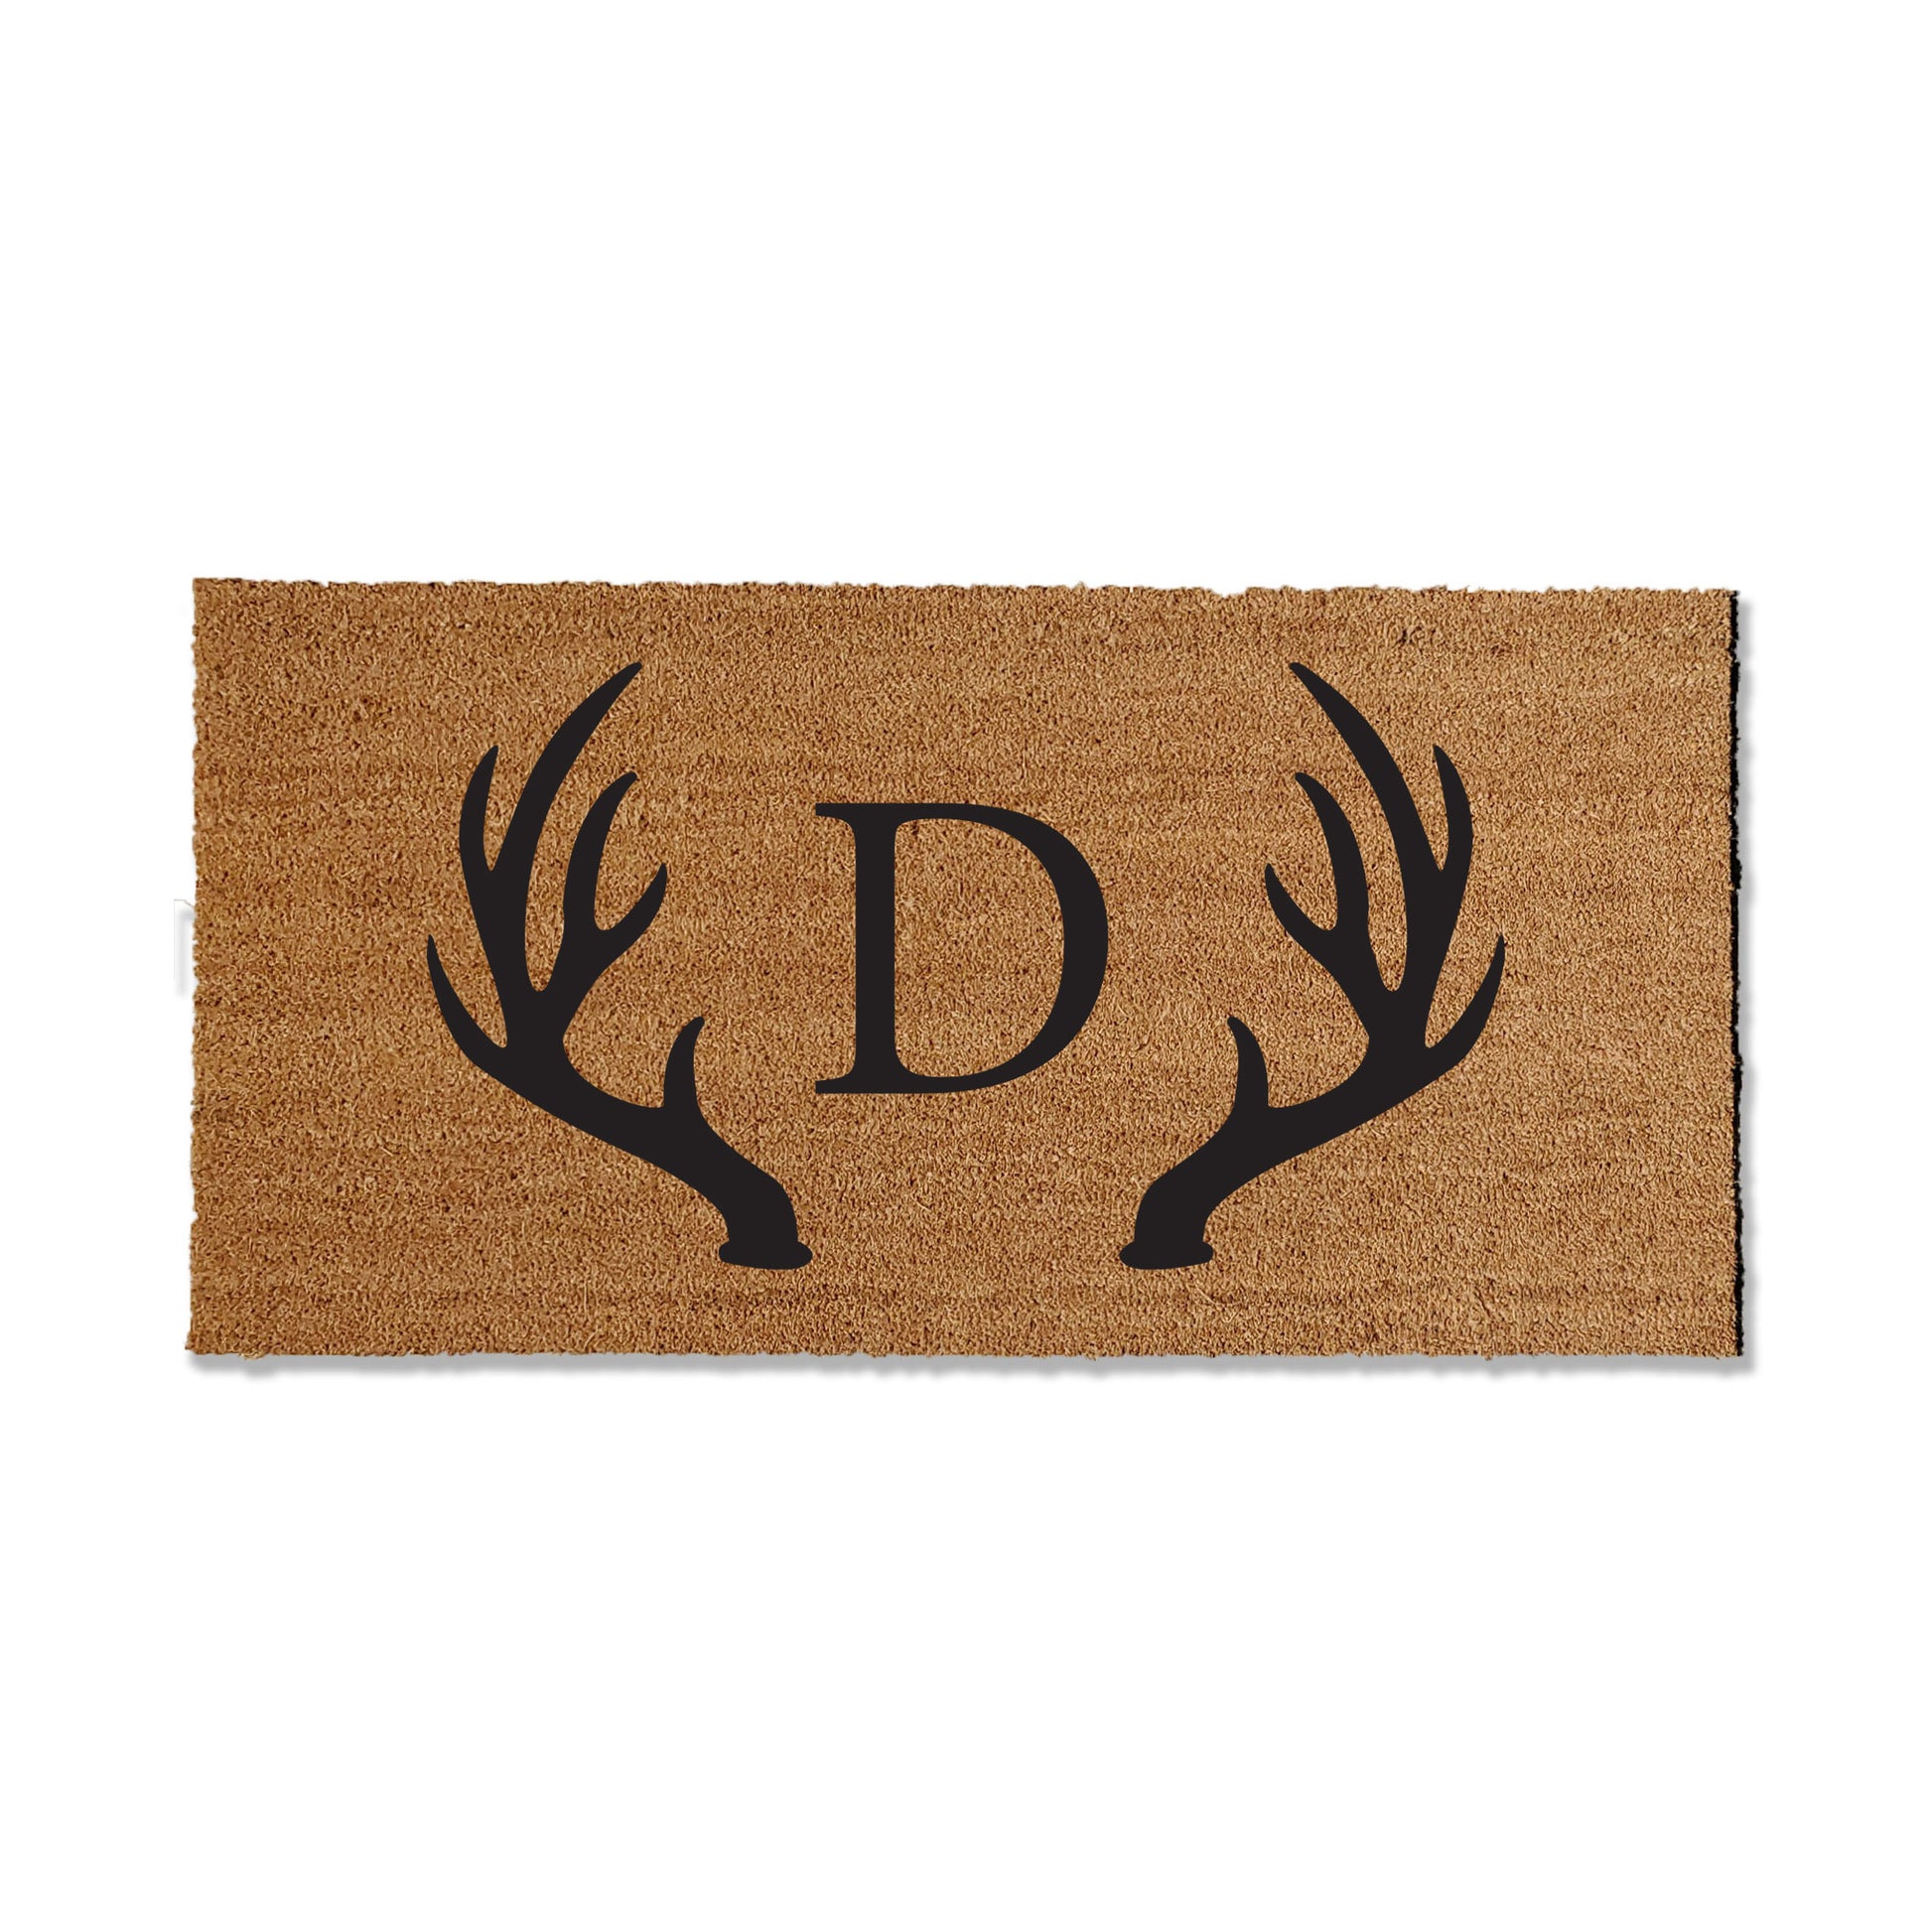 Elevate your entryway with our custom coir doormat, offered in various sizes. Featuring your last name initial in the center, framed by antlers, this personalized touch adds a warm and inviting atmosphere to your home.